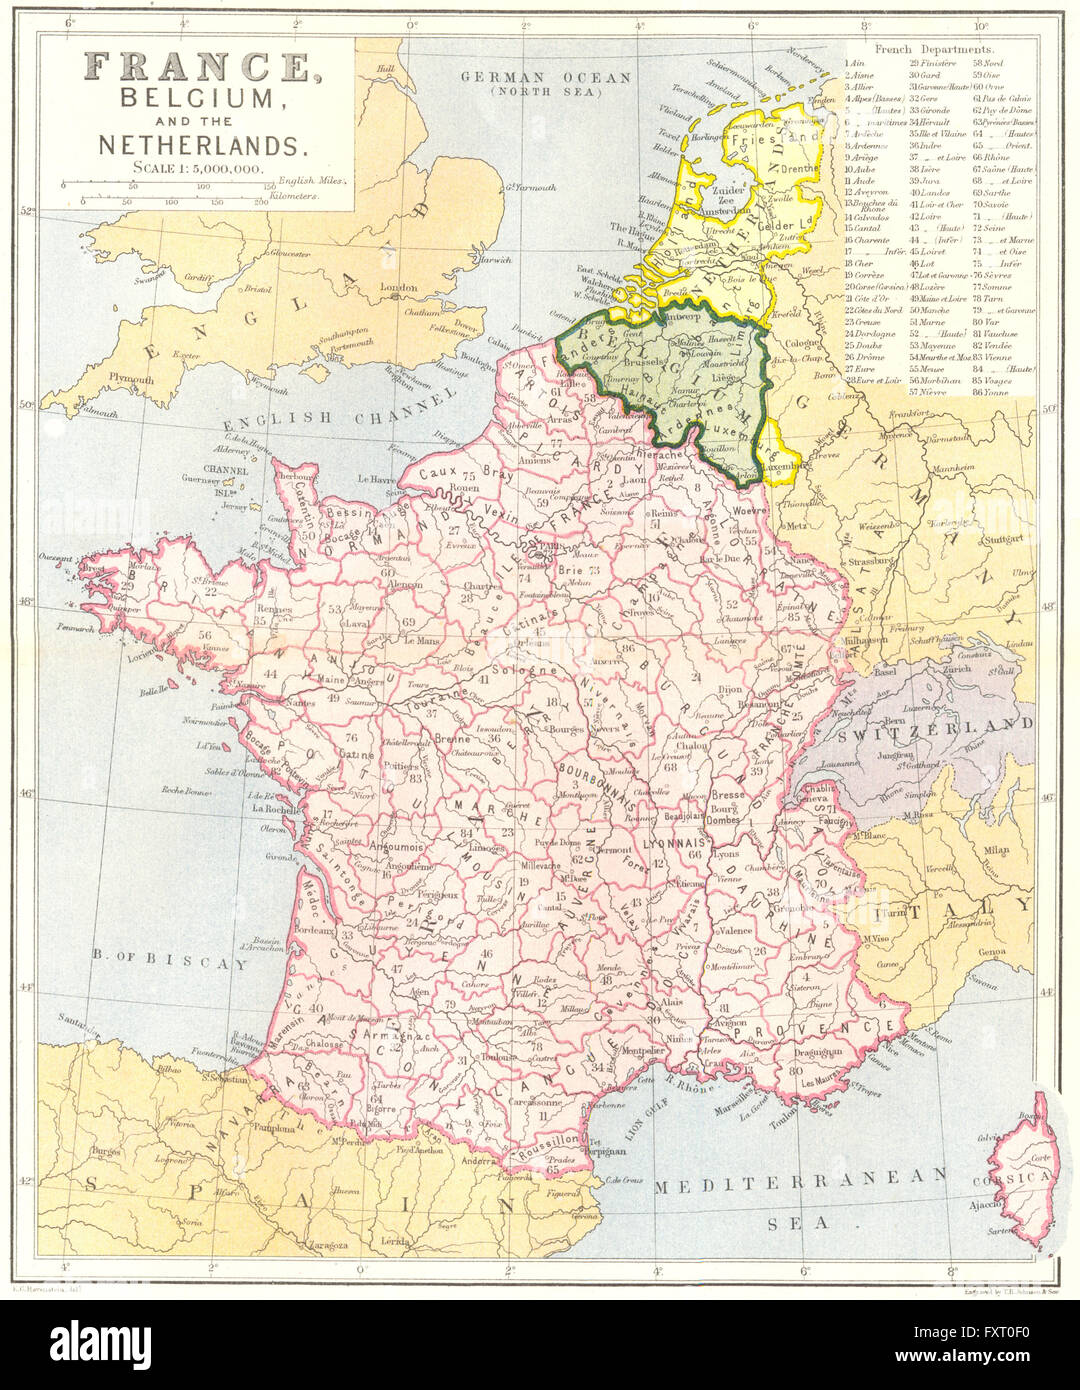 map of france and belgium Map Of France And Belgium High Resolution Stock Photography And map of france and belgium